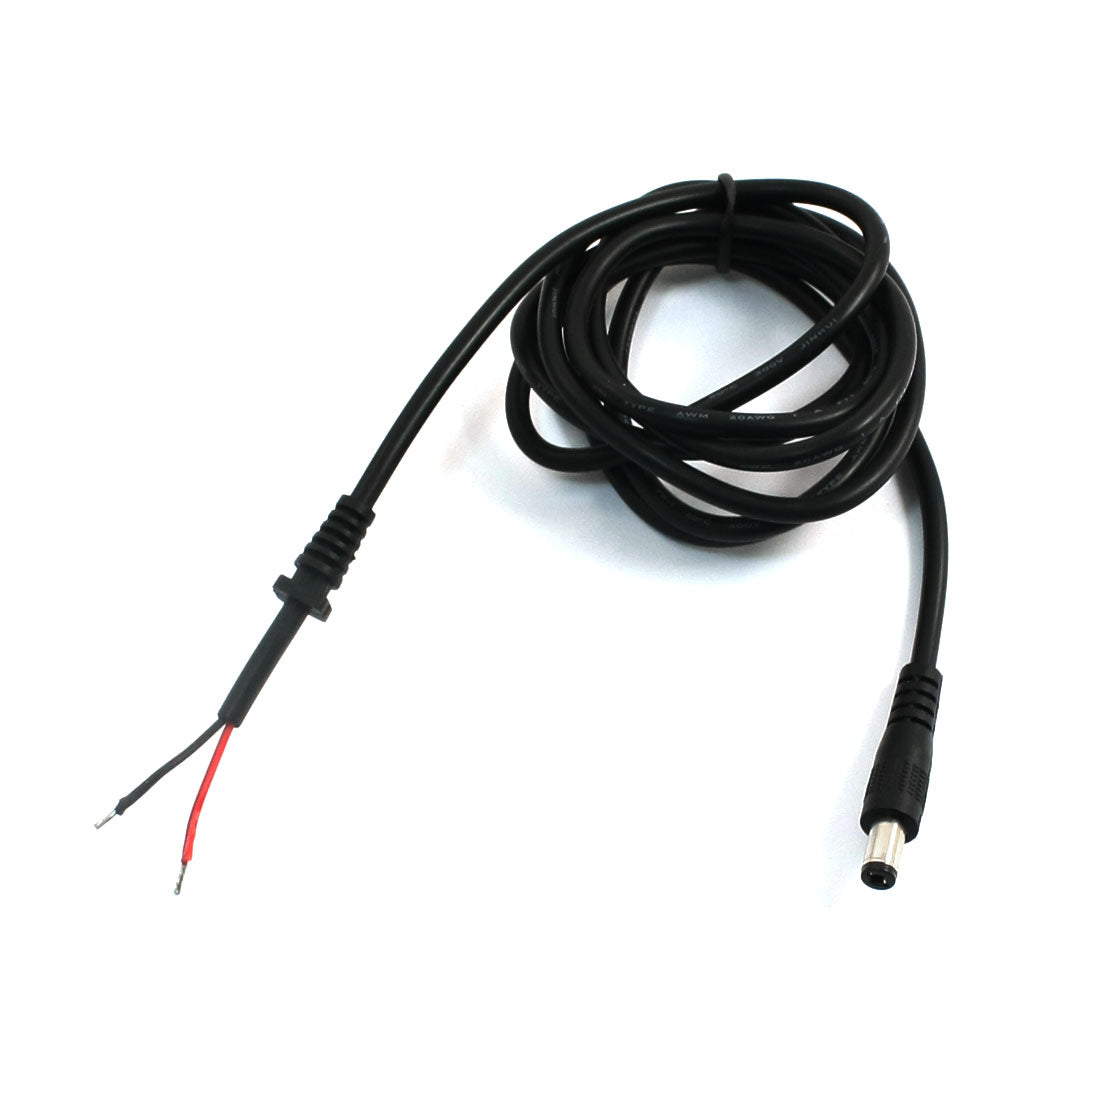 uxcell Uxcell DC 5.5 x 2.1mm Male Power Cable Cord 4.9Ft for CCTV Camera